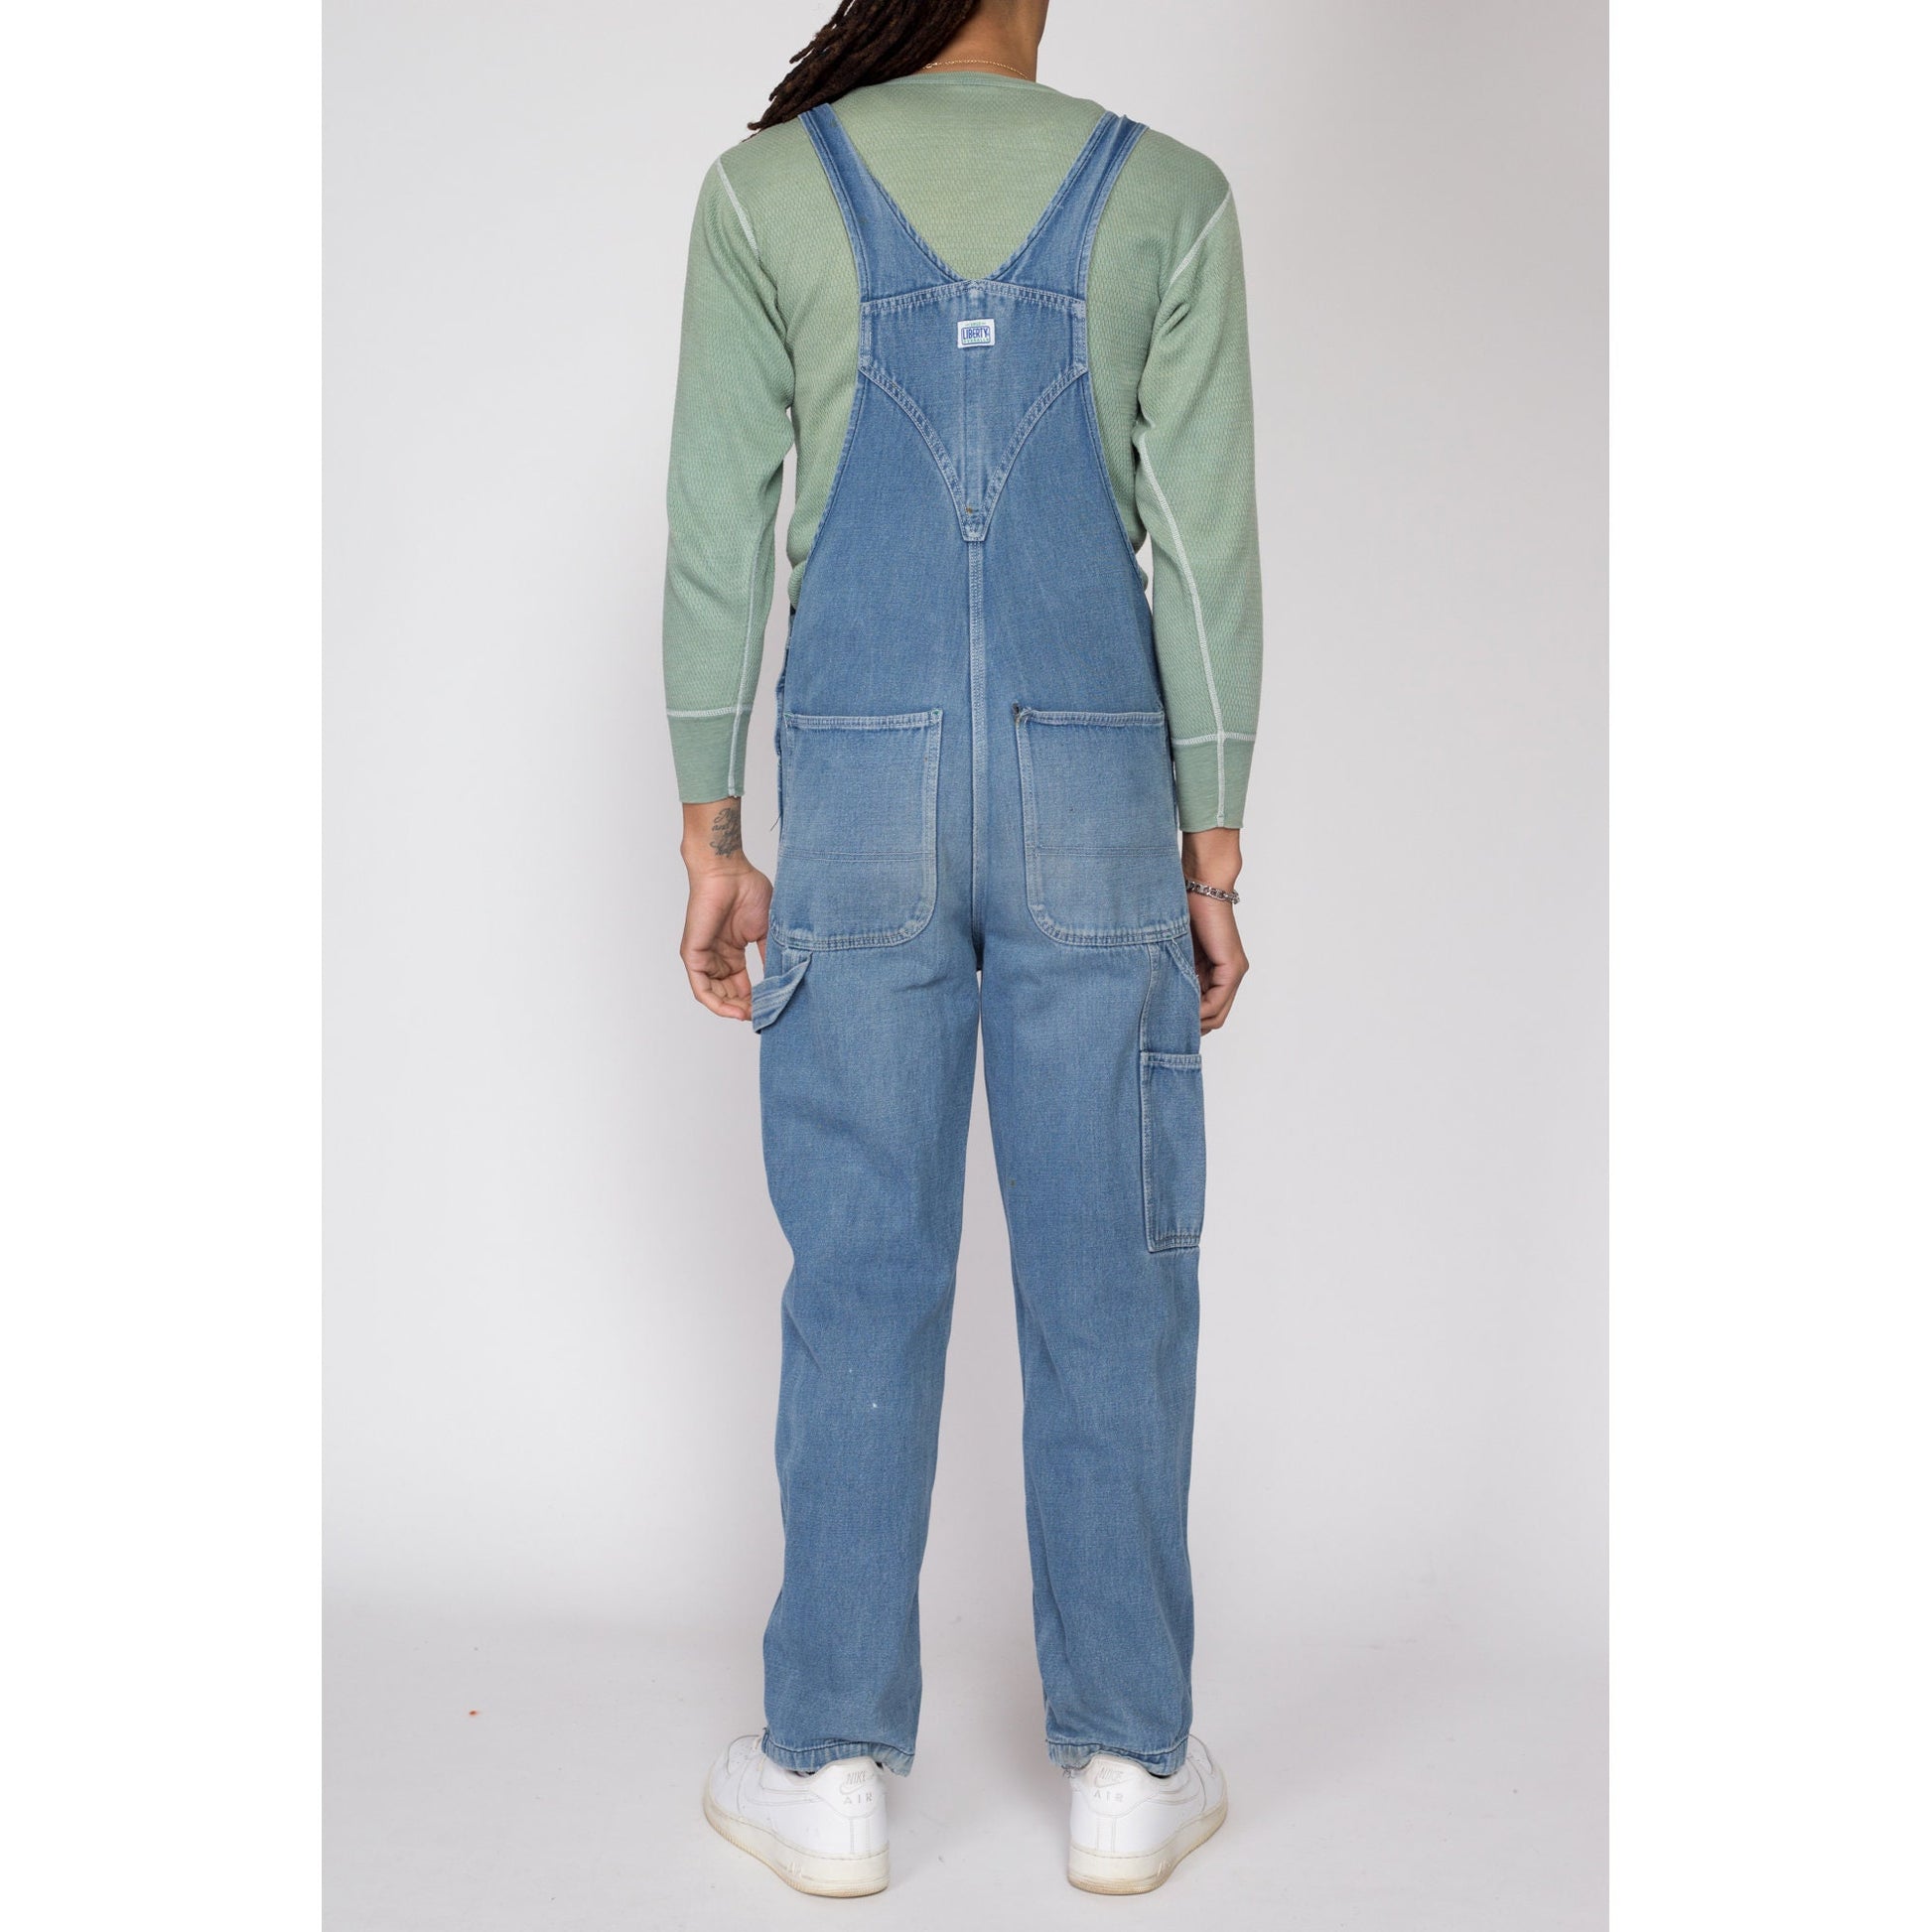 Medium 90s Liberty Overalls | Vintage Soft Faded Denim Overall Pants Baggy Blue Jean Dungarees